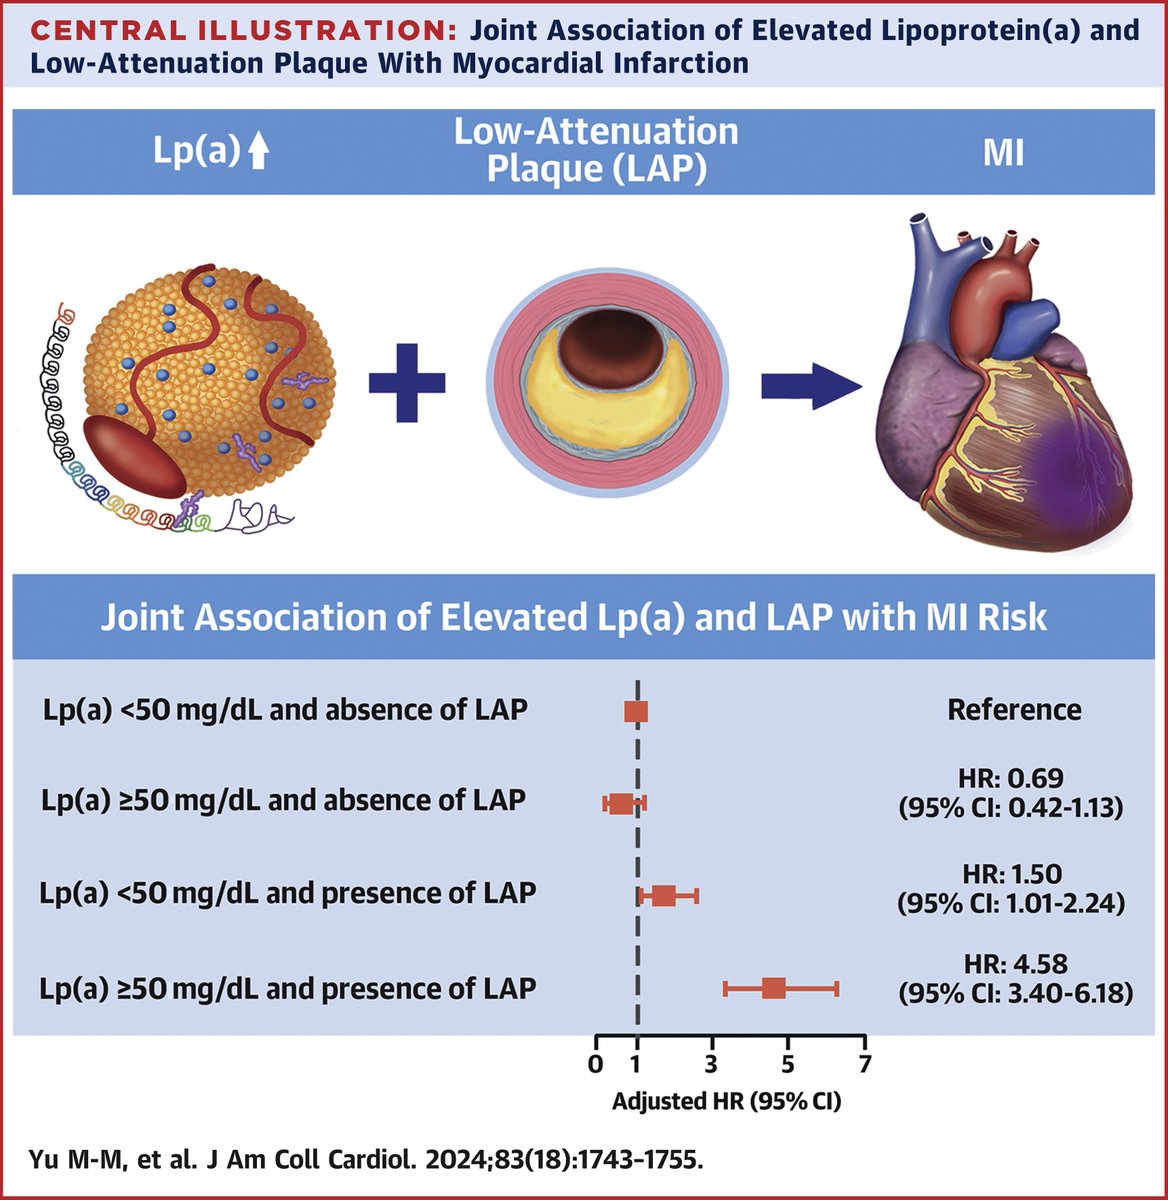 Elevated Lp(a) augments the risk of #cvMI during 8 years in follow-up in patients with low CT attenuation plaque: bit.ly/3JLCtzd #JACC #cvCAD #Lpa #cvLipids #CardioEd